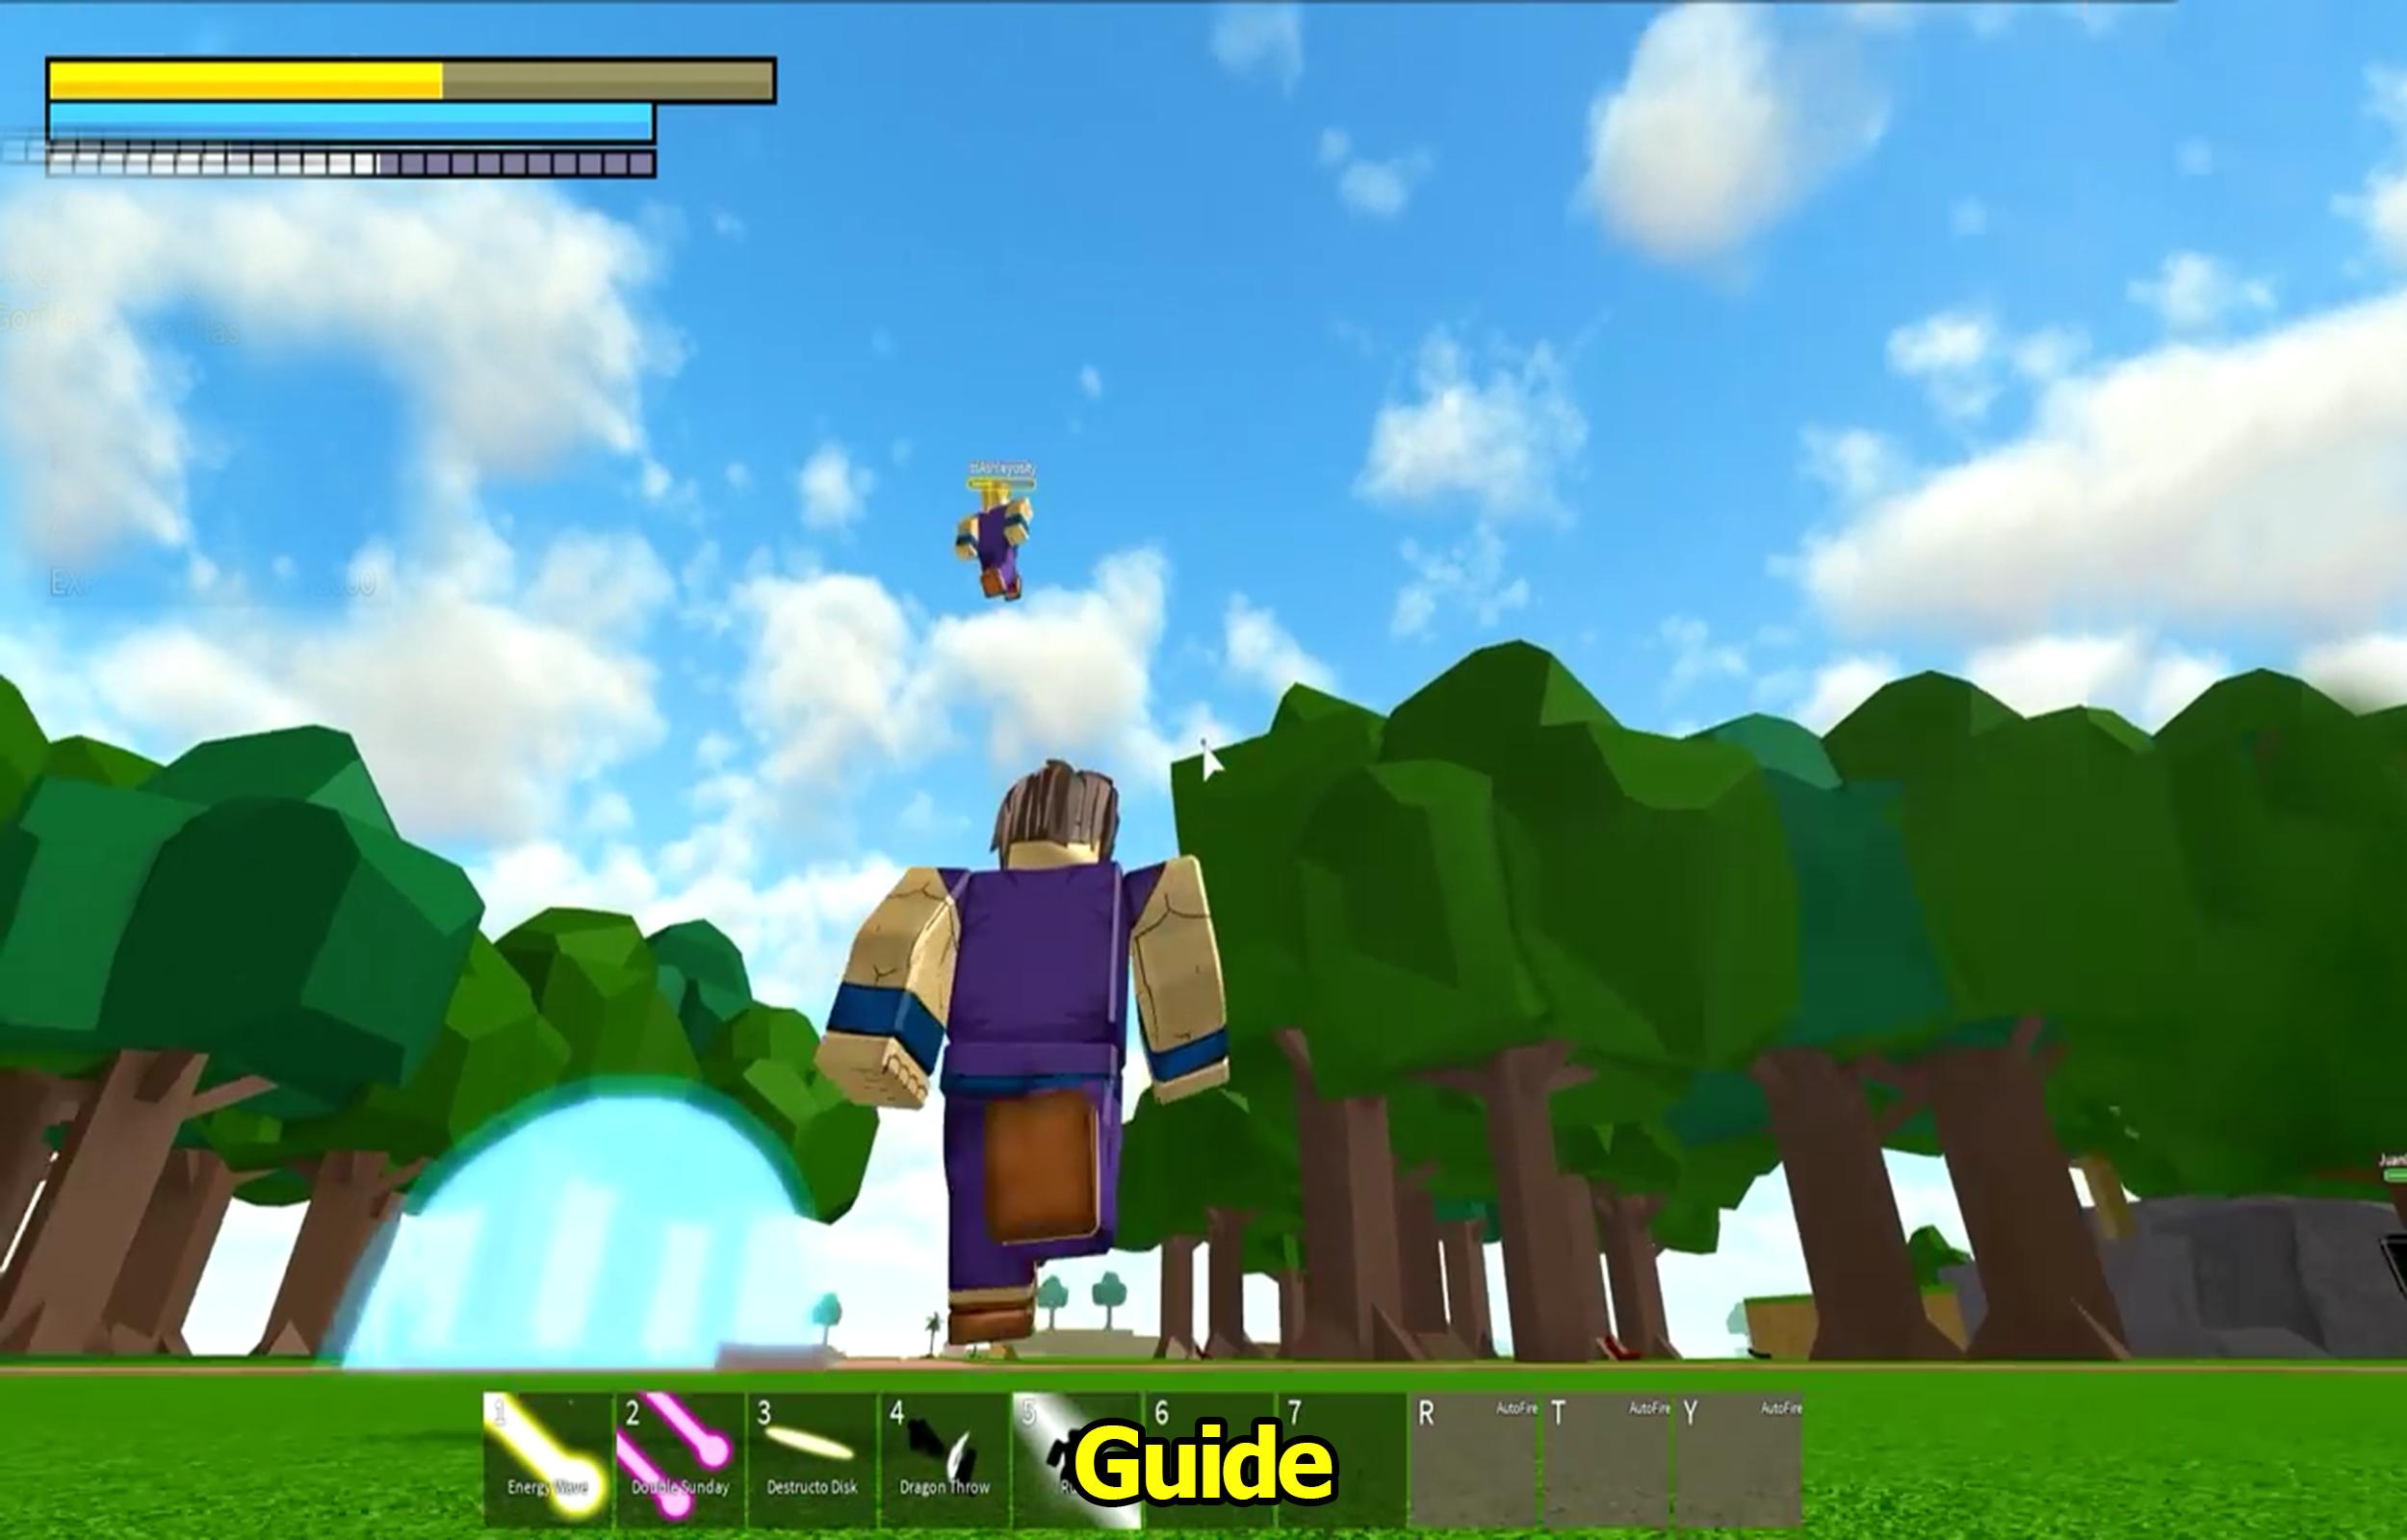 Guide For Dragon Ball Z Roblox For Android Apk Download - guide for dragon ball z roblox 101 apk android 23 232